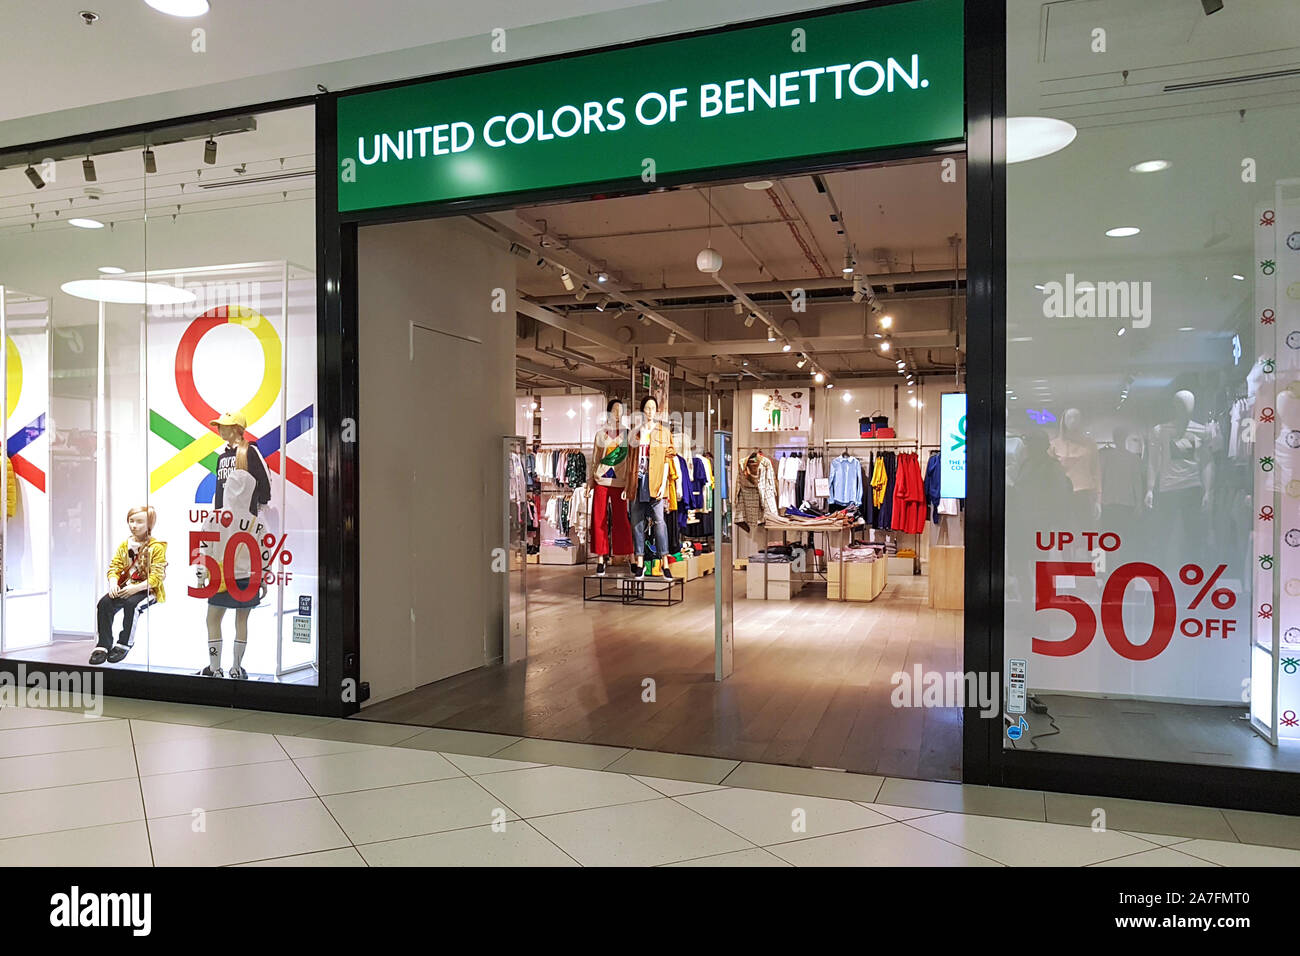 Gdynia, Poland - August 13, 2019: Exterior view of the United Colors of  Benetton Store. Benetton Group is a global fashion brand based in Italy  Stock Photo - Alamy